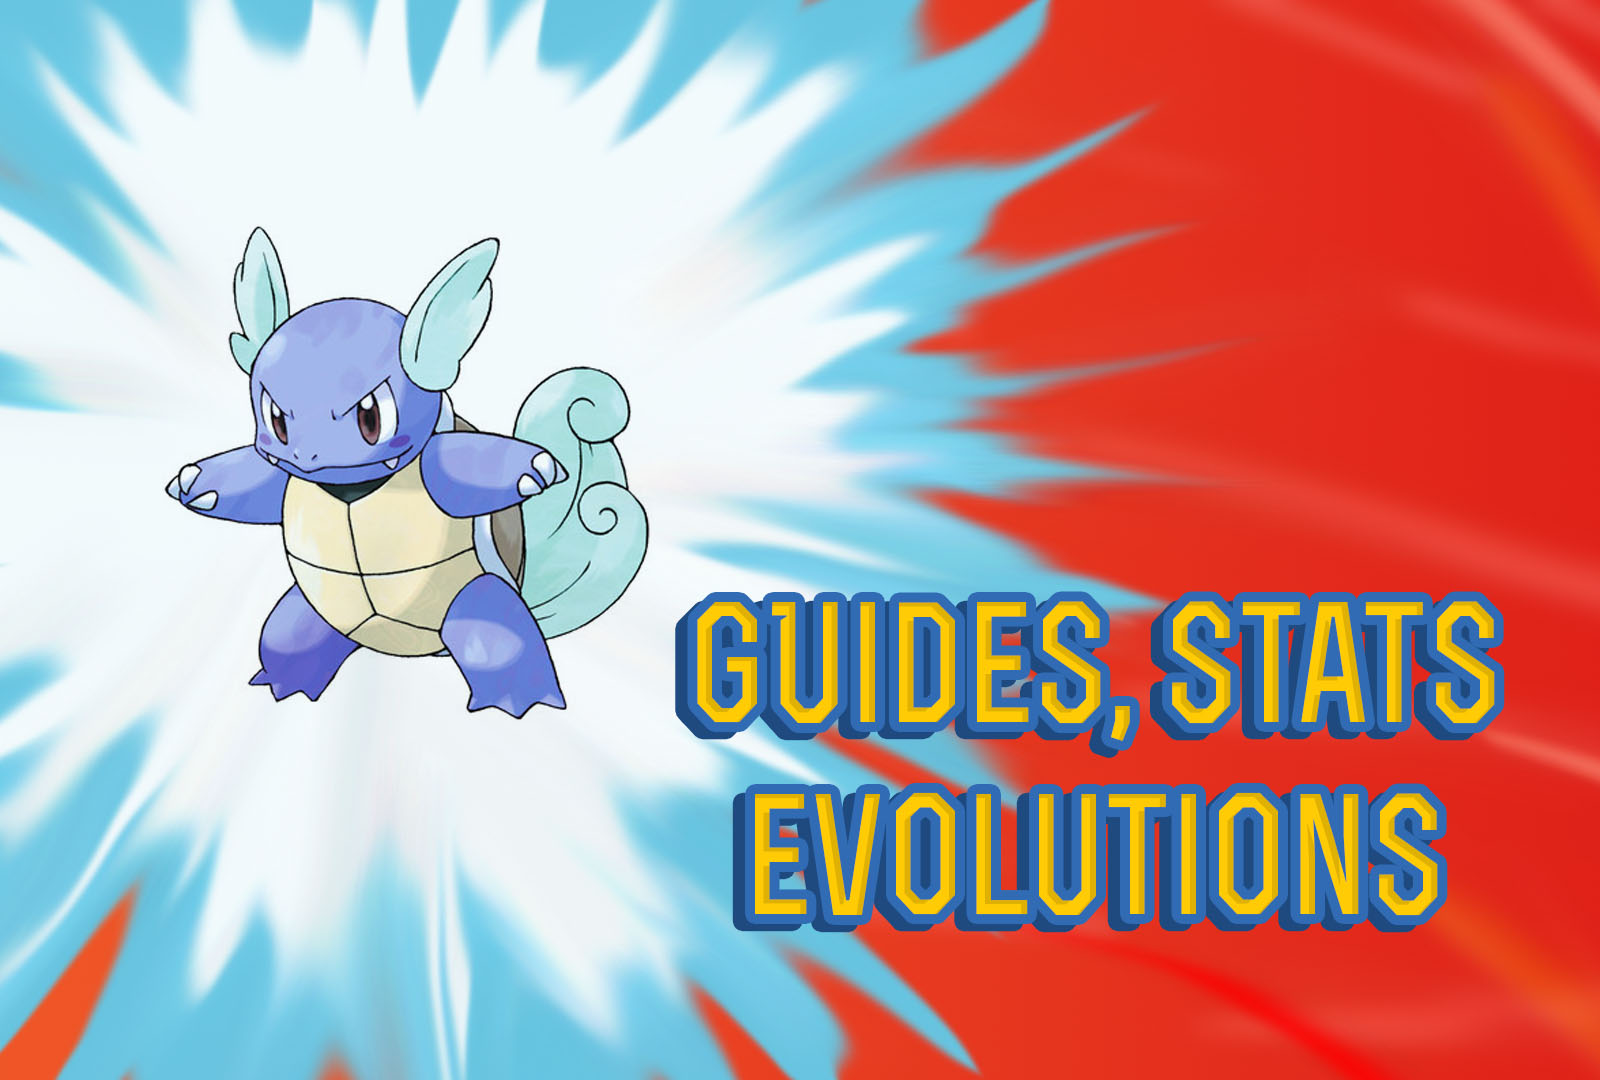 Pokemon Lets Go Wartortle Guide, Stats, Evolutions and More